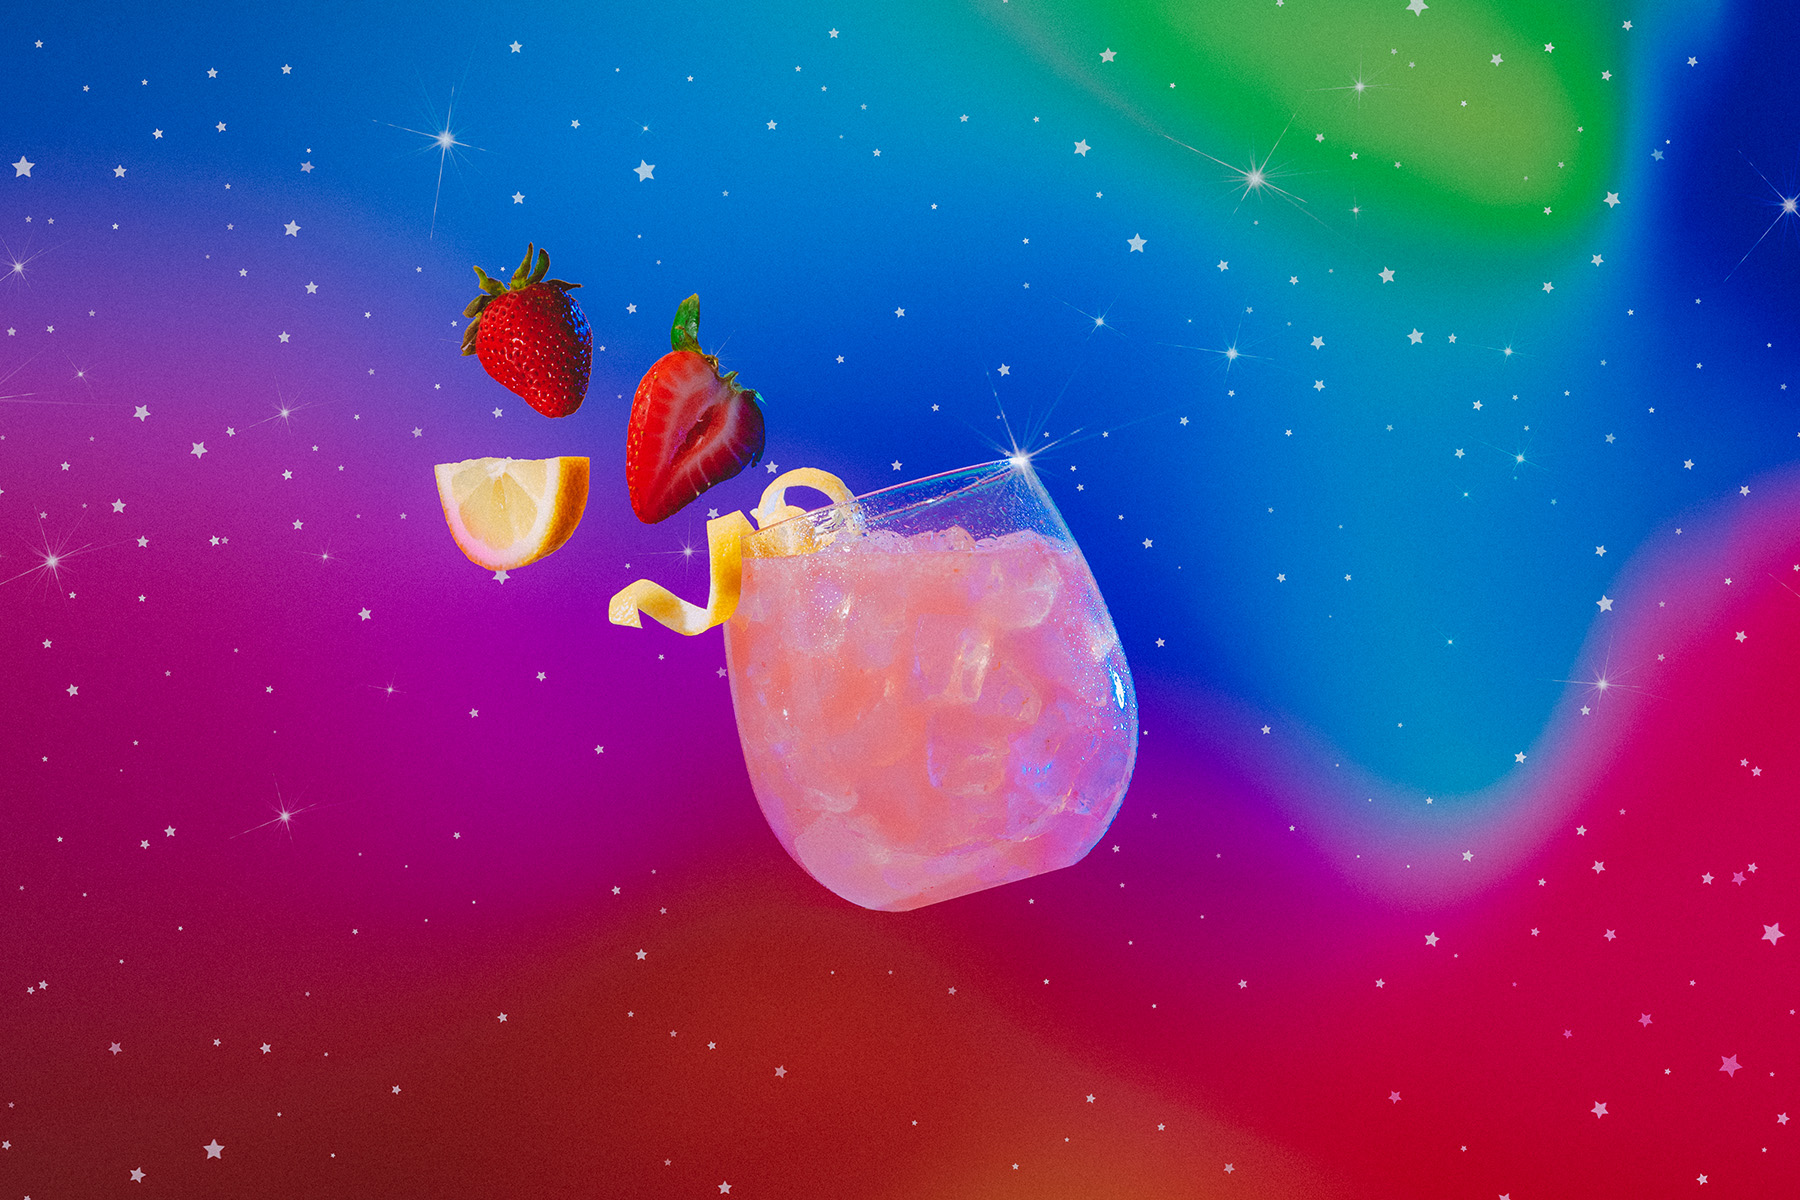 leo zodiac inspired rose and strawberry cocktail surrounded by floating strawberry and lemon slices in cosmic surroundings